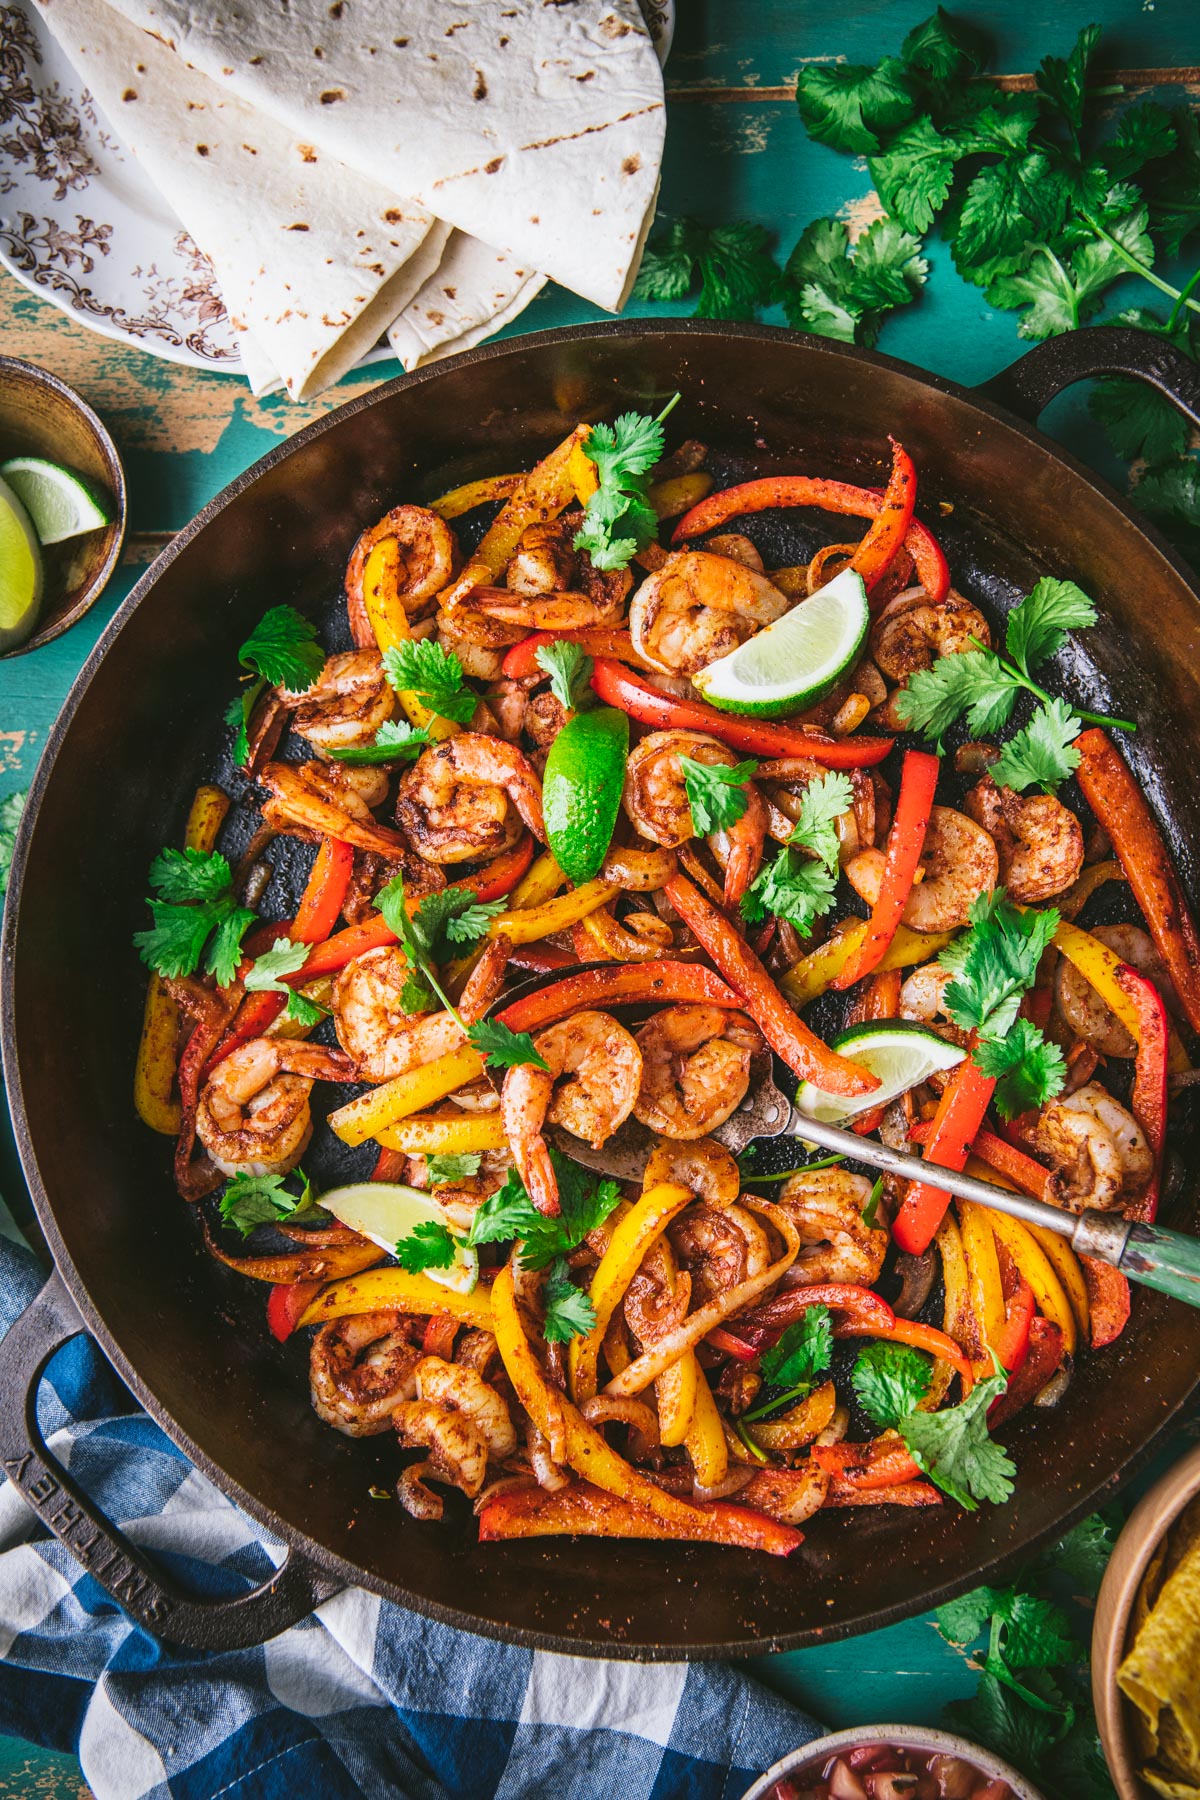 Anyone else have a fajita pan they stole from Chili's? : r/castiron